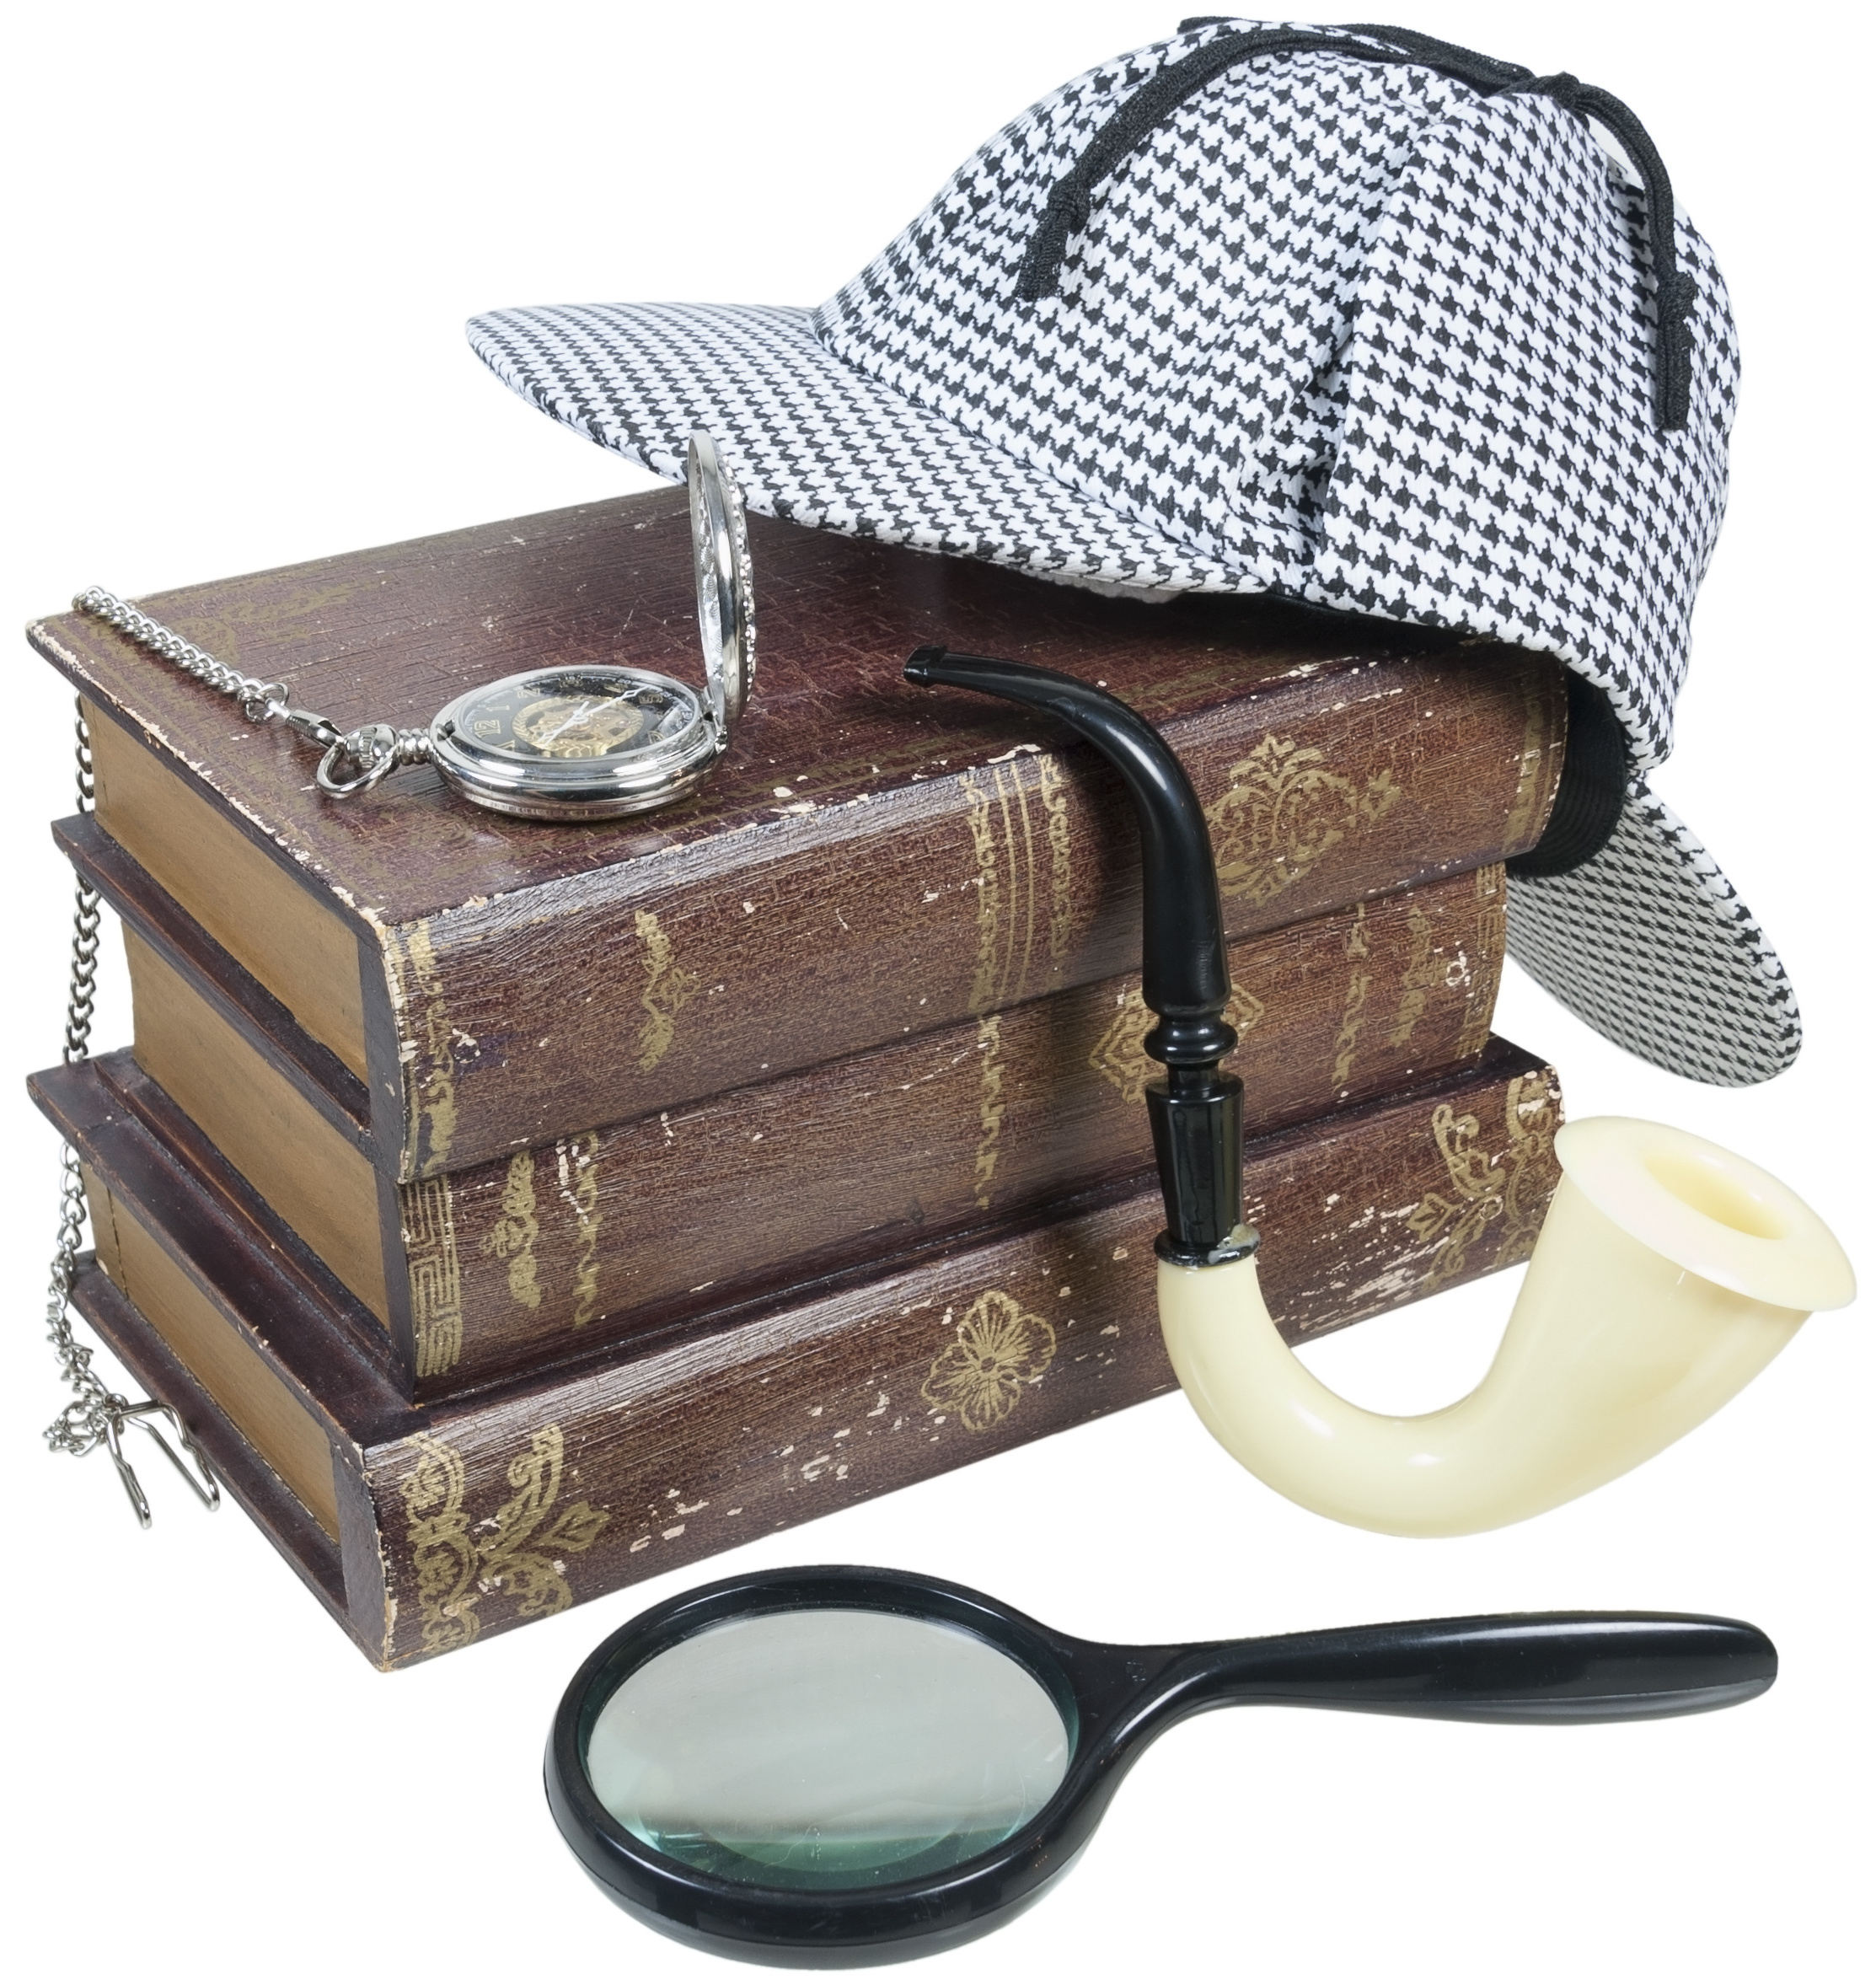 Mystery Books with Deerstalker Cap, Magnifier, Pipe and Pocket Watch - path included